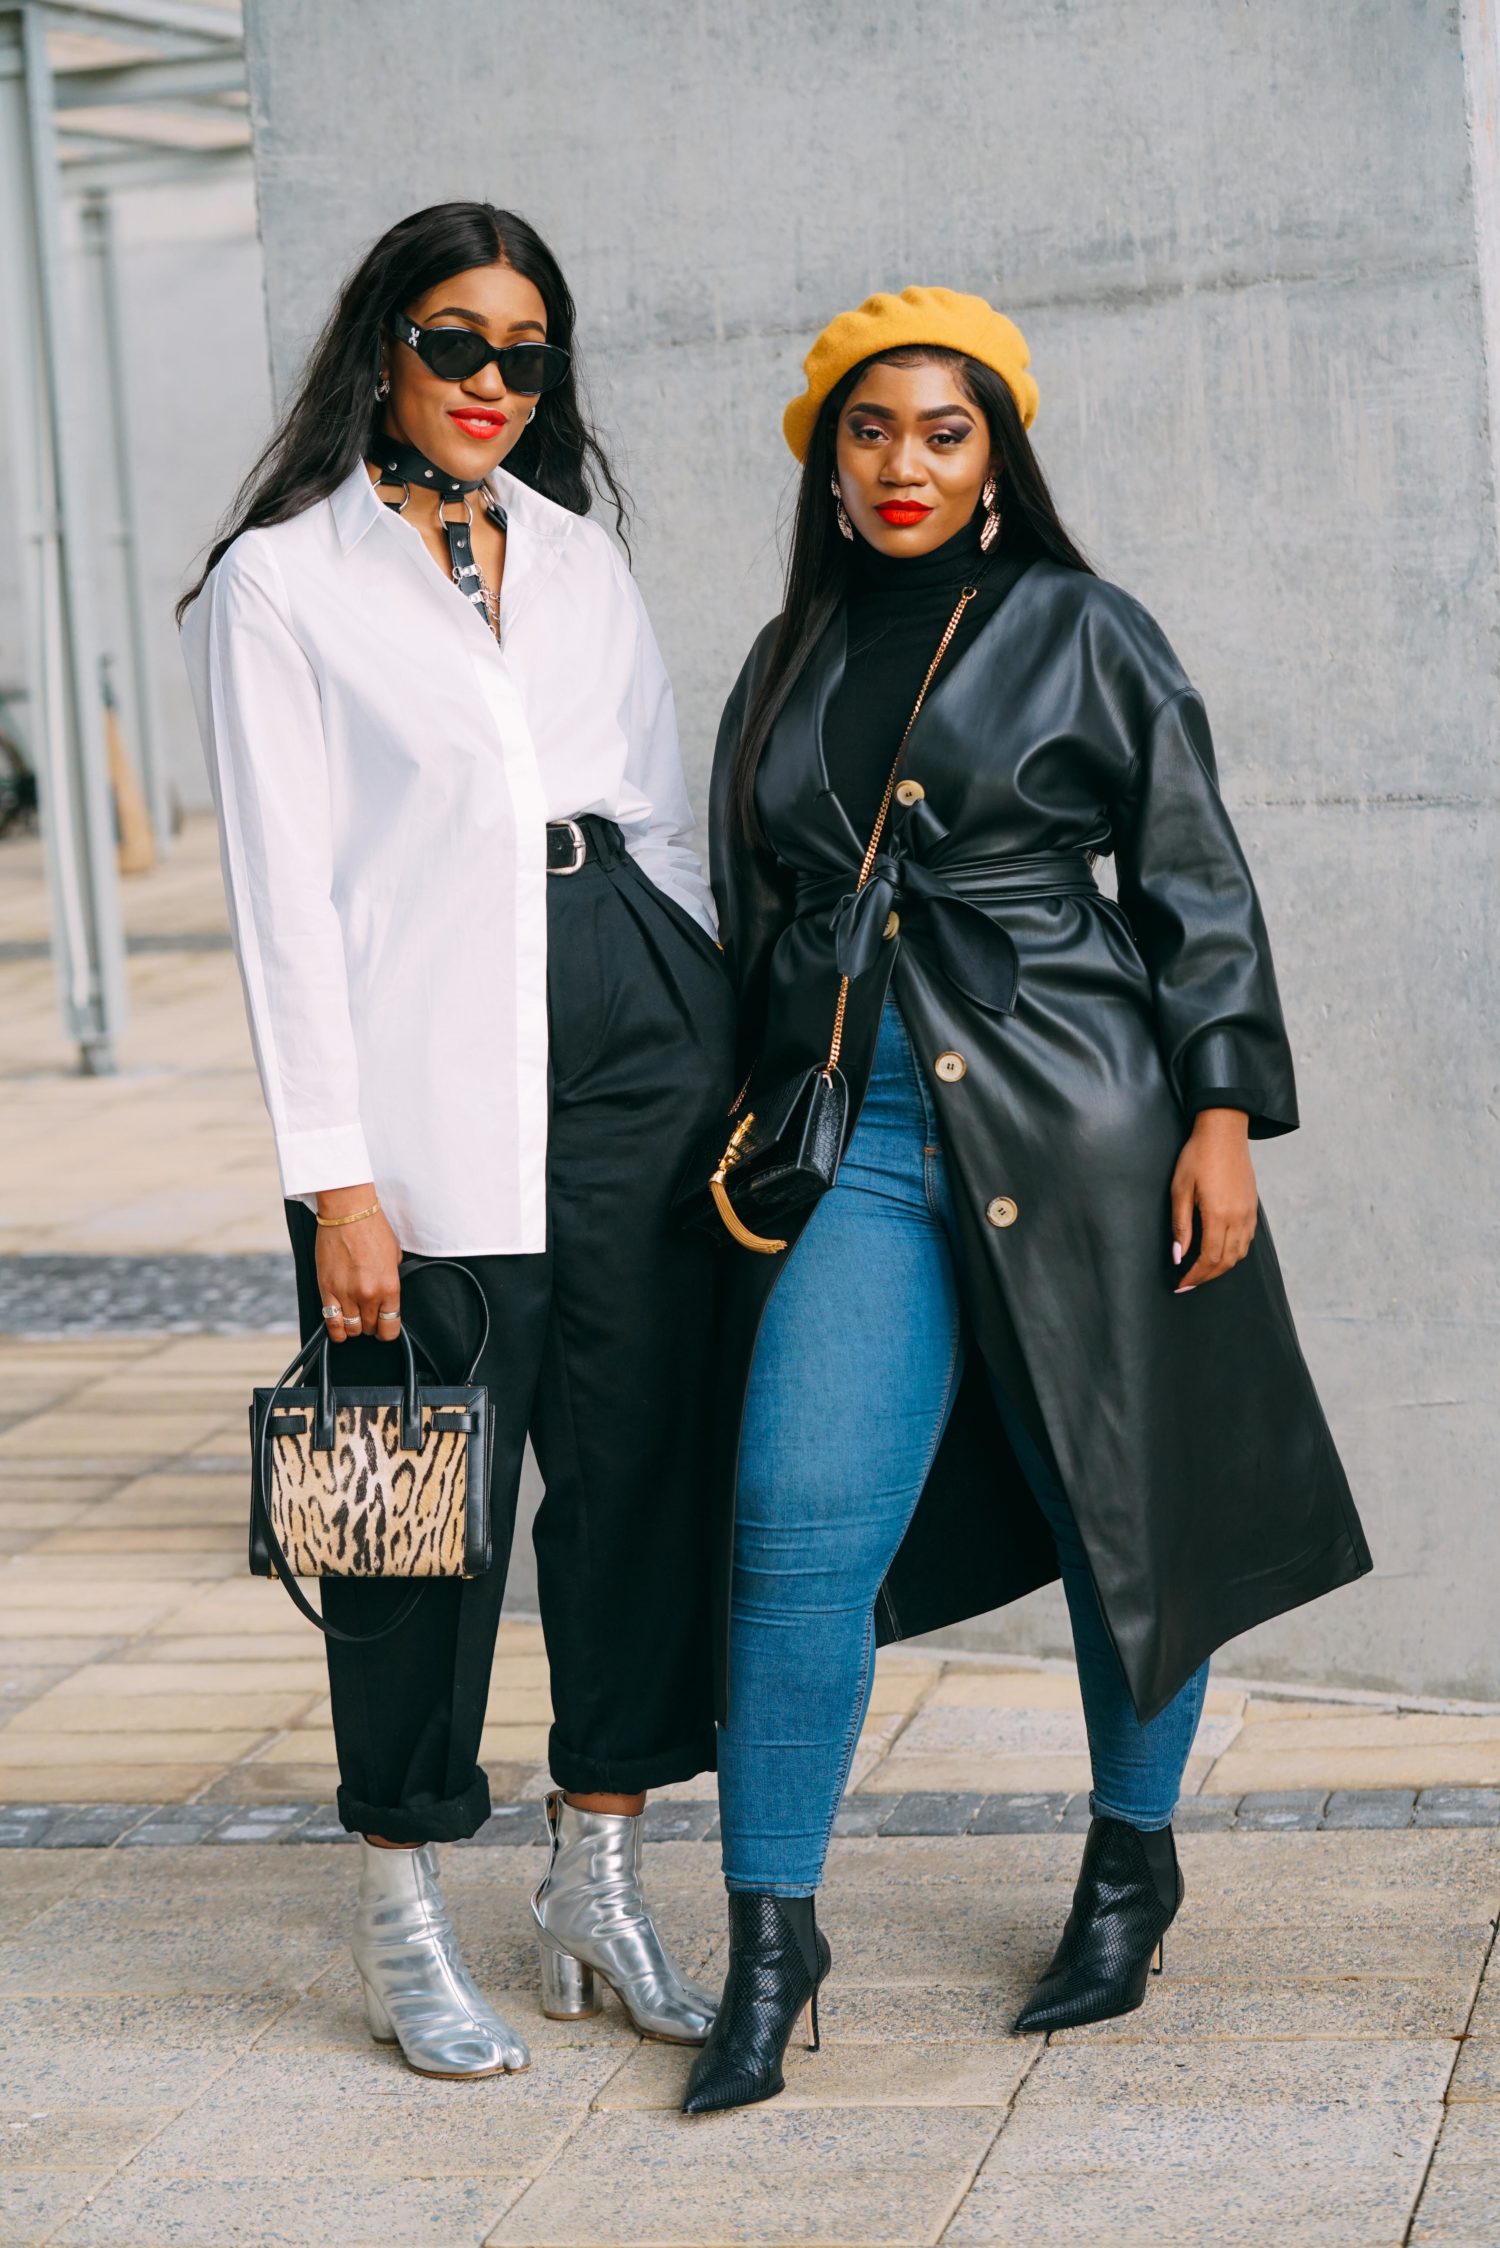 It’s Official: These Were the Most Killer Street Style & Front Row Looks From #AFICTFW19